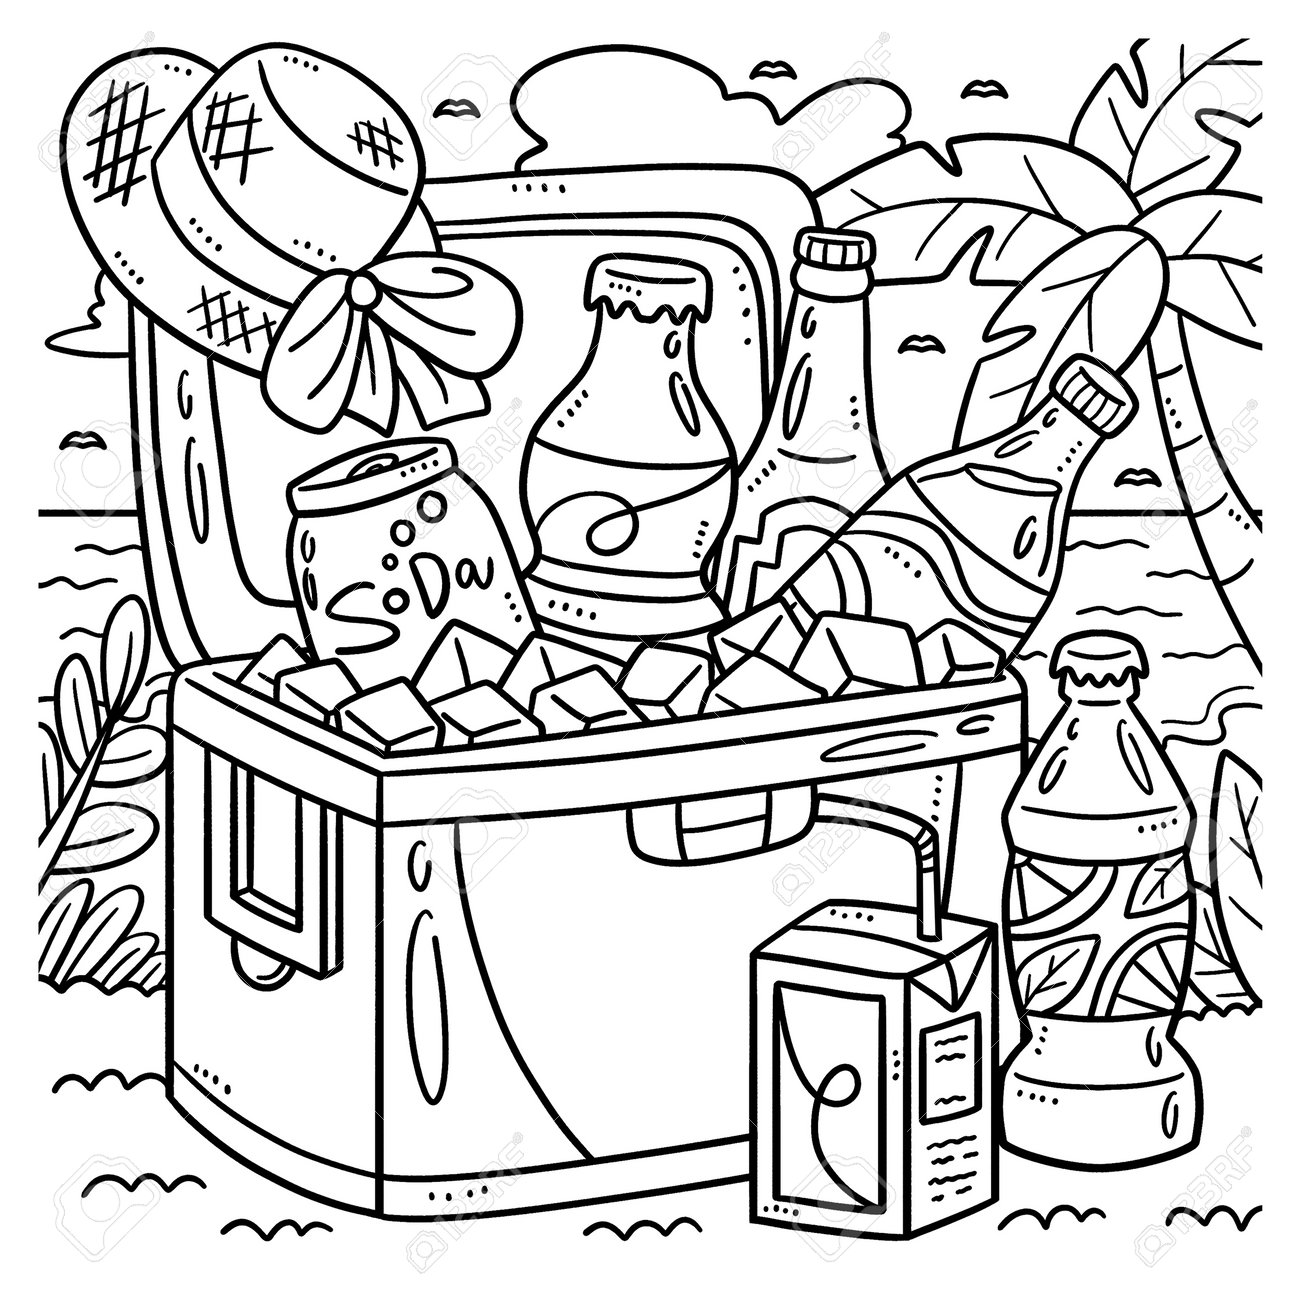 Summer beverages in ice cooler coloring page royalty free svg cliparts vectors and stock illustration image